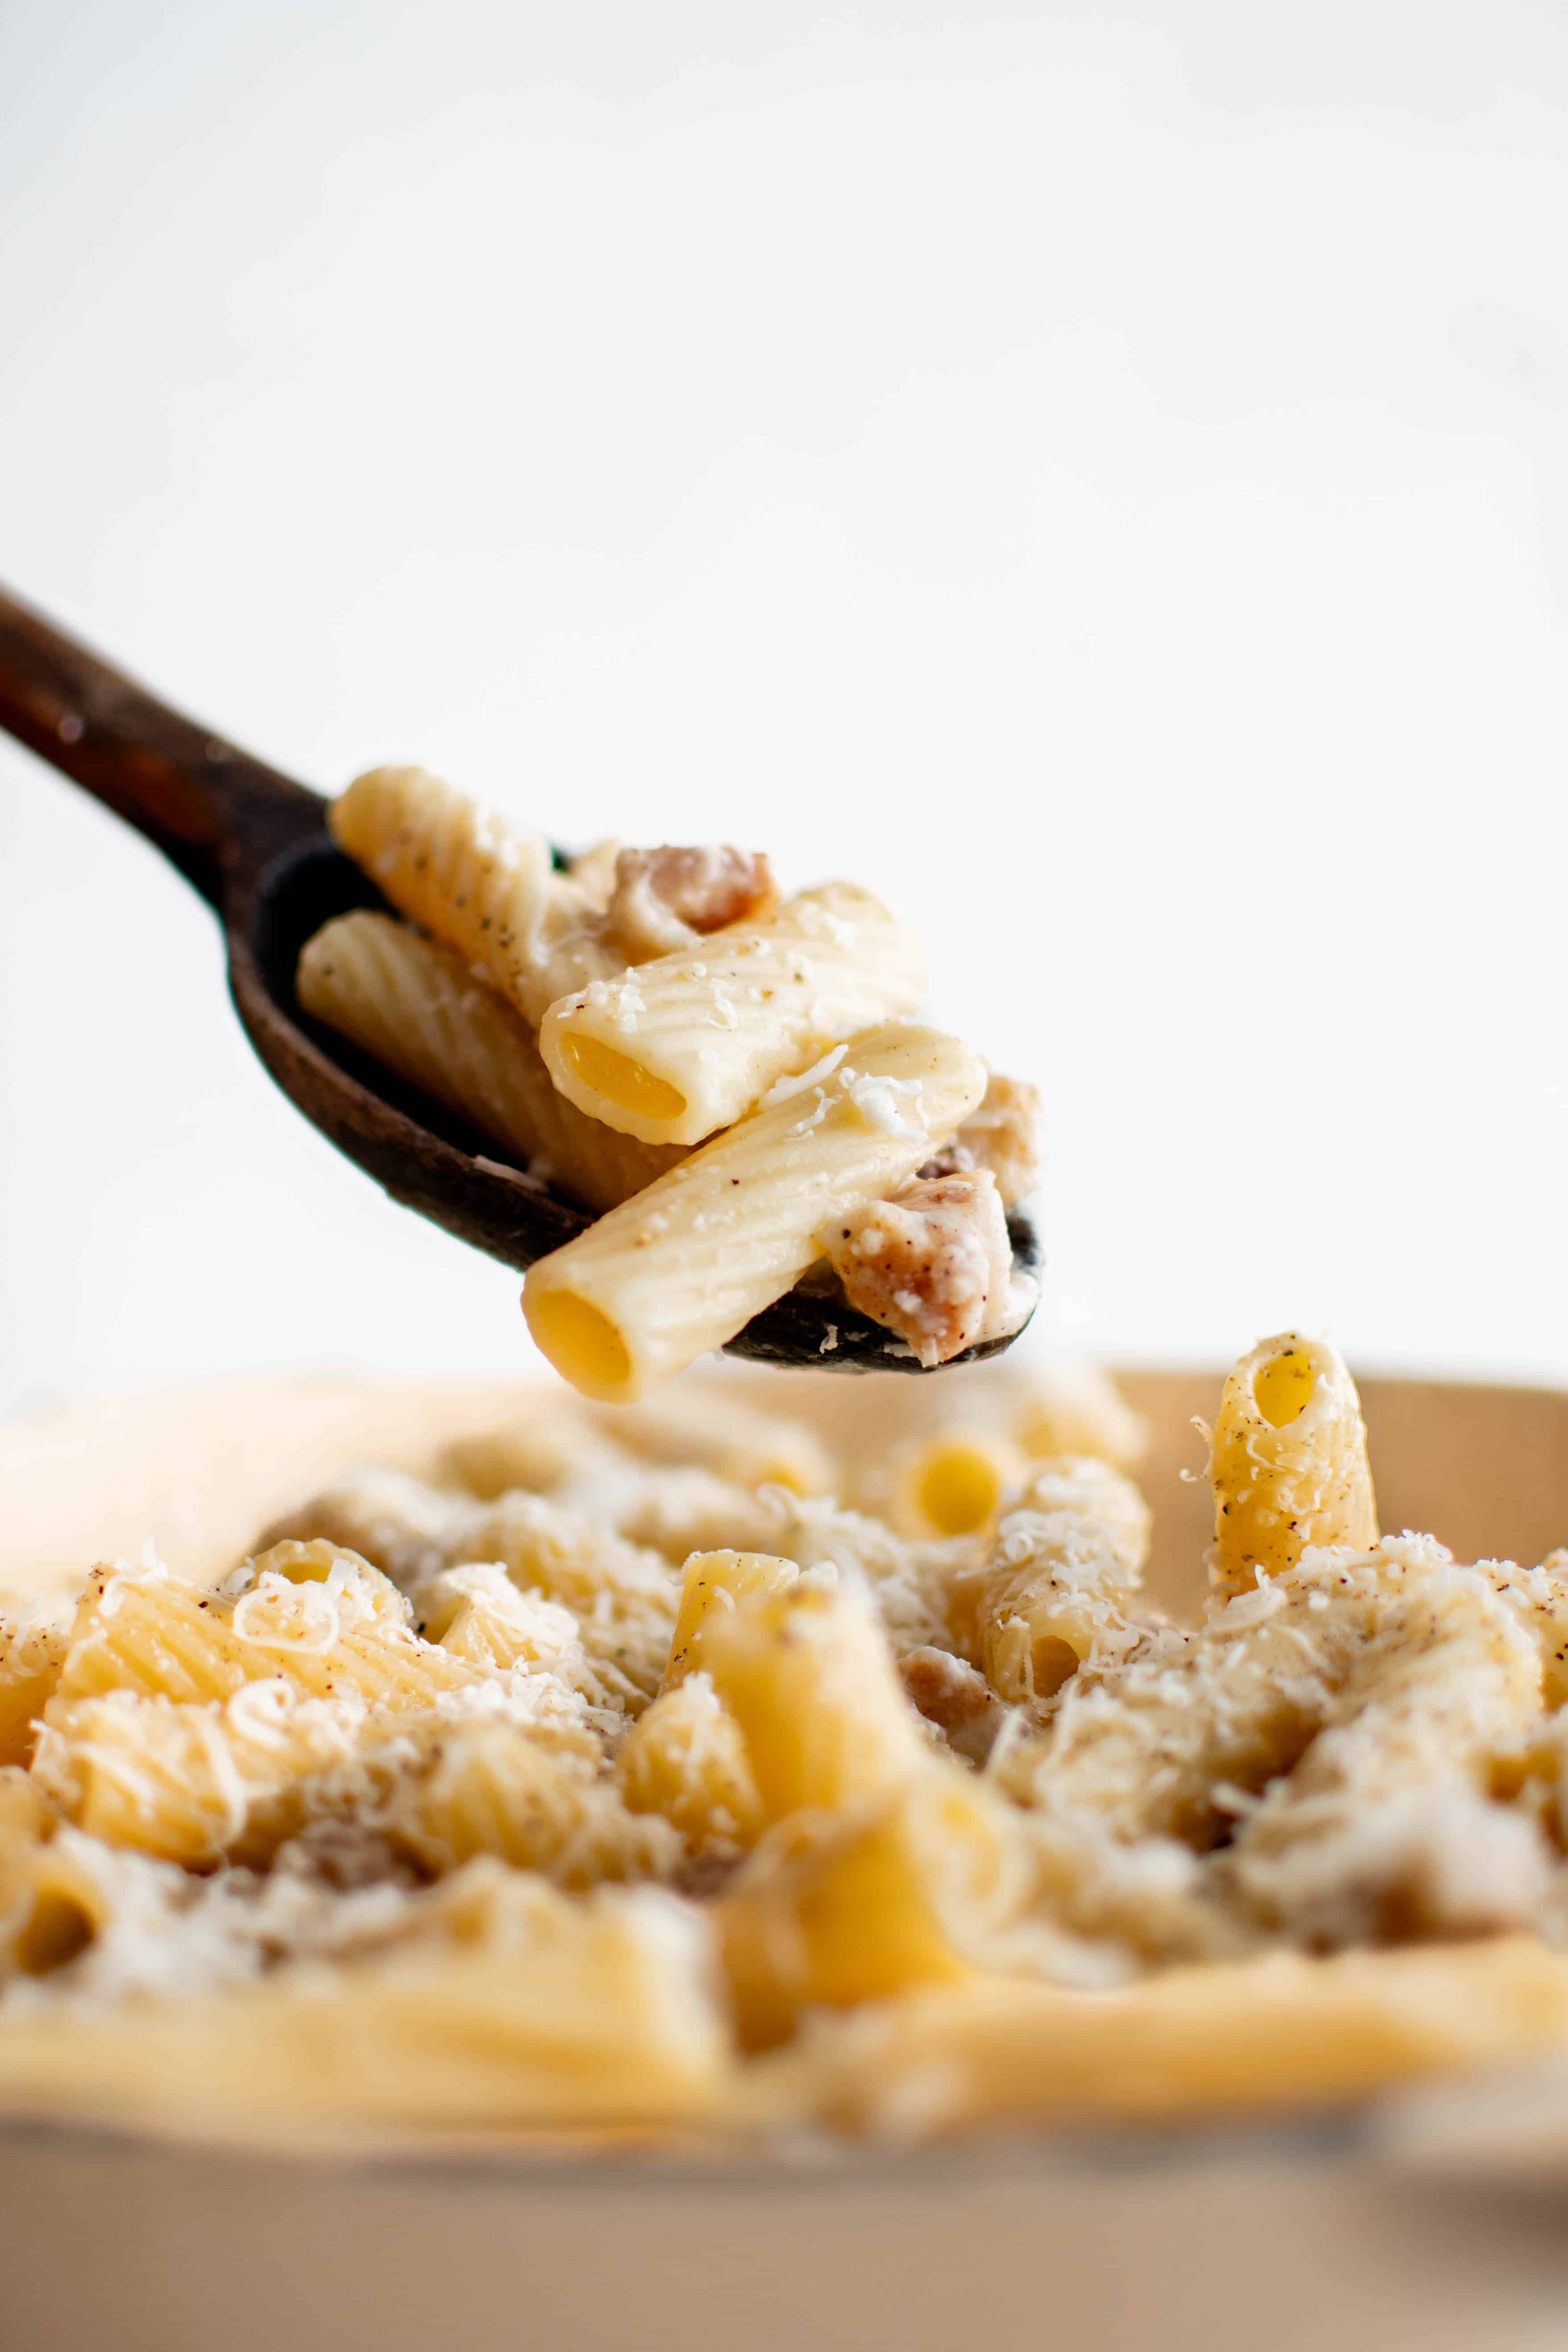 Large spoon filled with a serving of rigatoni alla gricia hovering over a pan filled with fully cooked and prepared pasta.